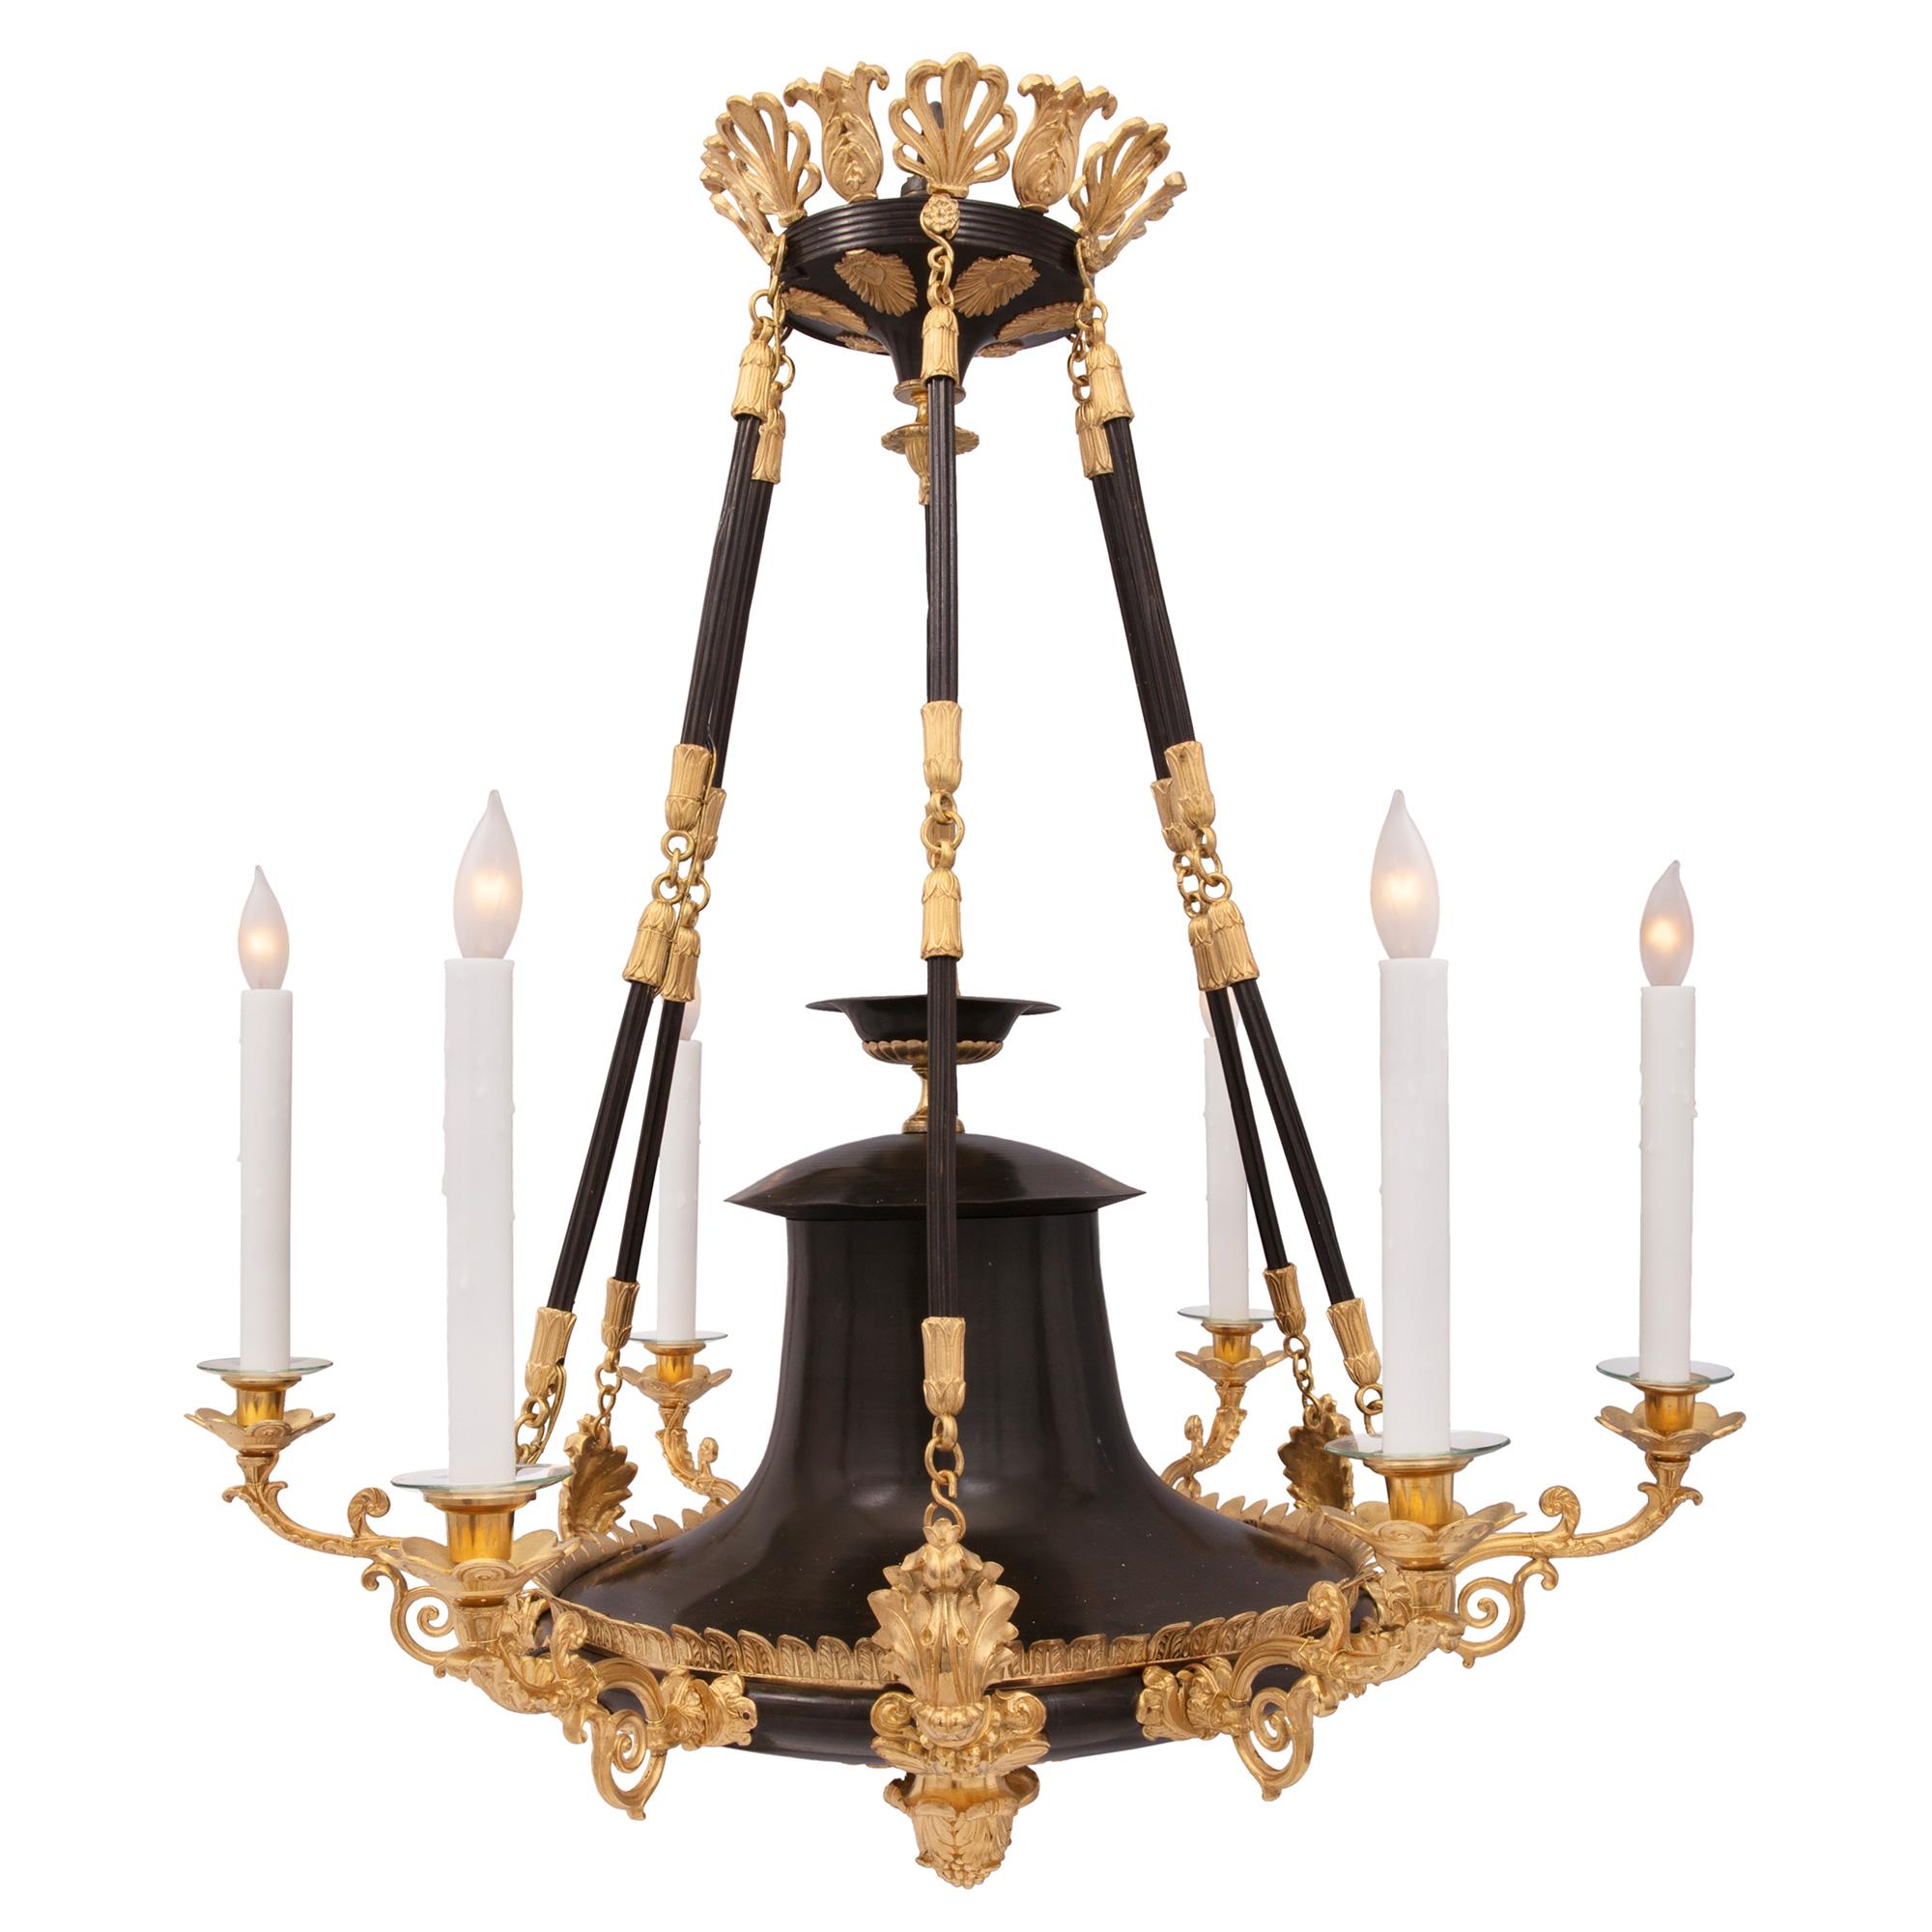 A handsome French 19th century neo-classical st. patinated bronze and ormolu six arm chandelier. The chandelier is centered by a striking inverted foliate acorn bottom finial amidst decorative acanthus leaves. The elegant patinated bronze body